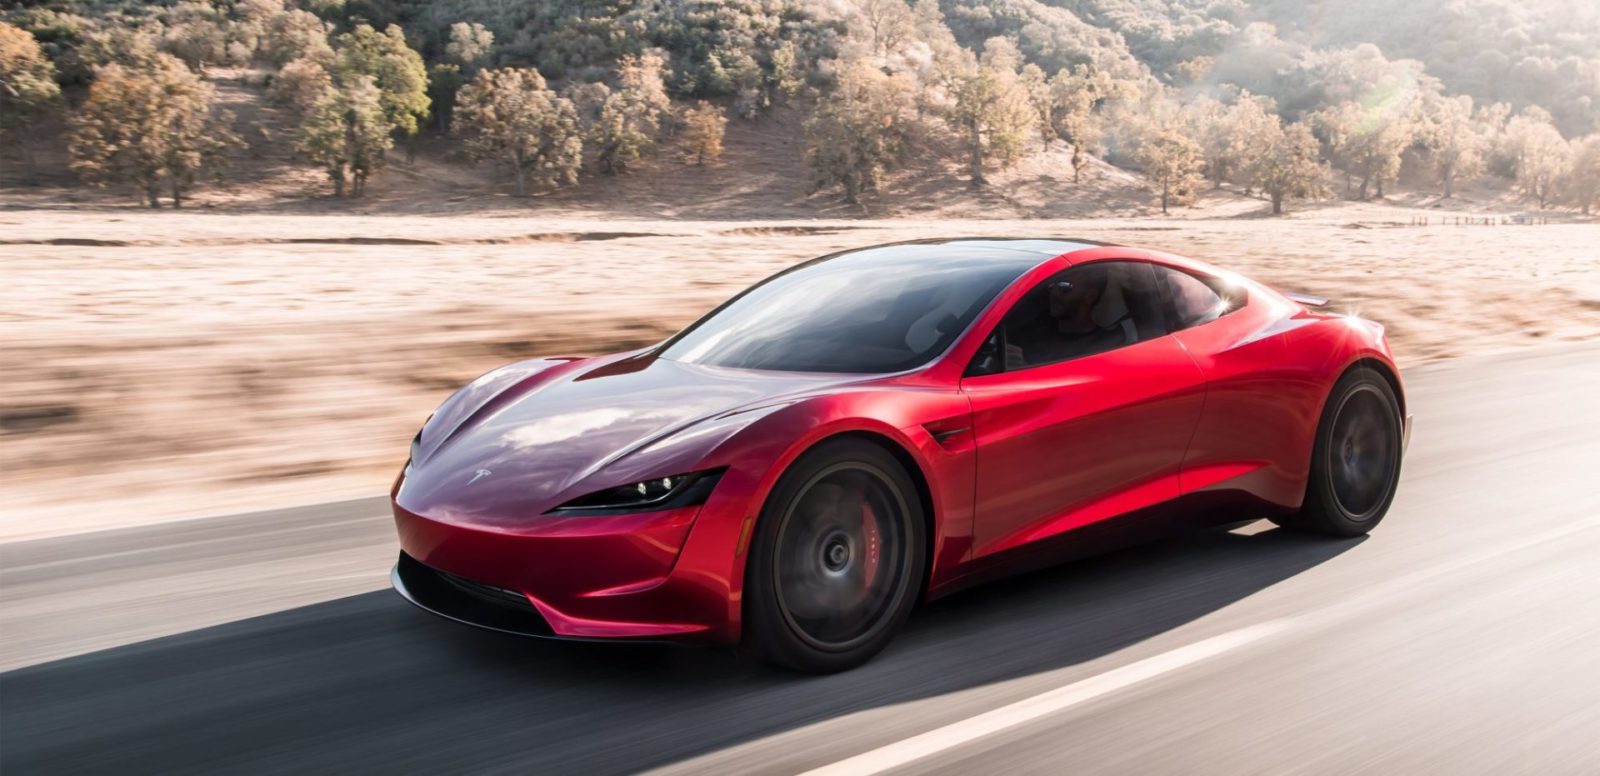 Tesla Roadster: New prototype will go from 0-60 mph in 1.1 second